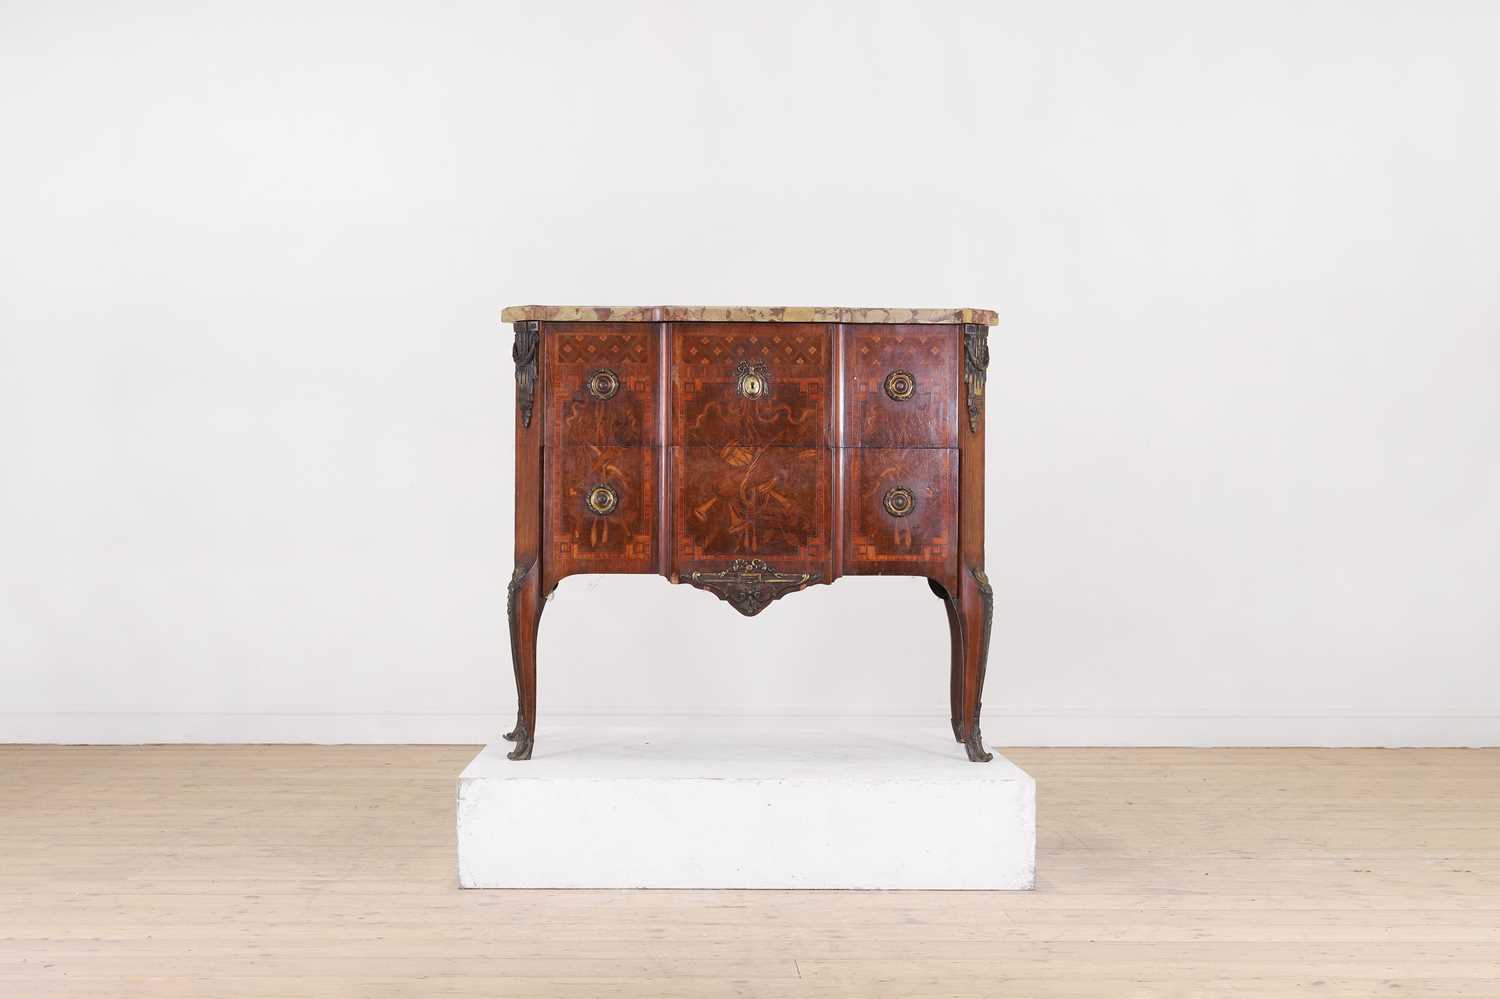 A Transitional-style tulipwood and marquetry commode,